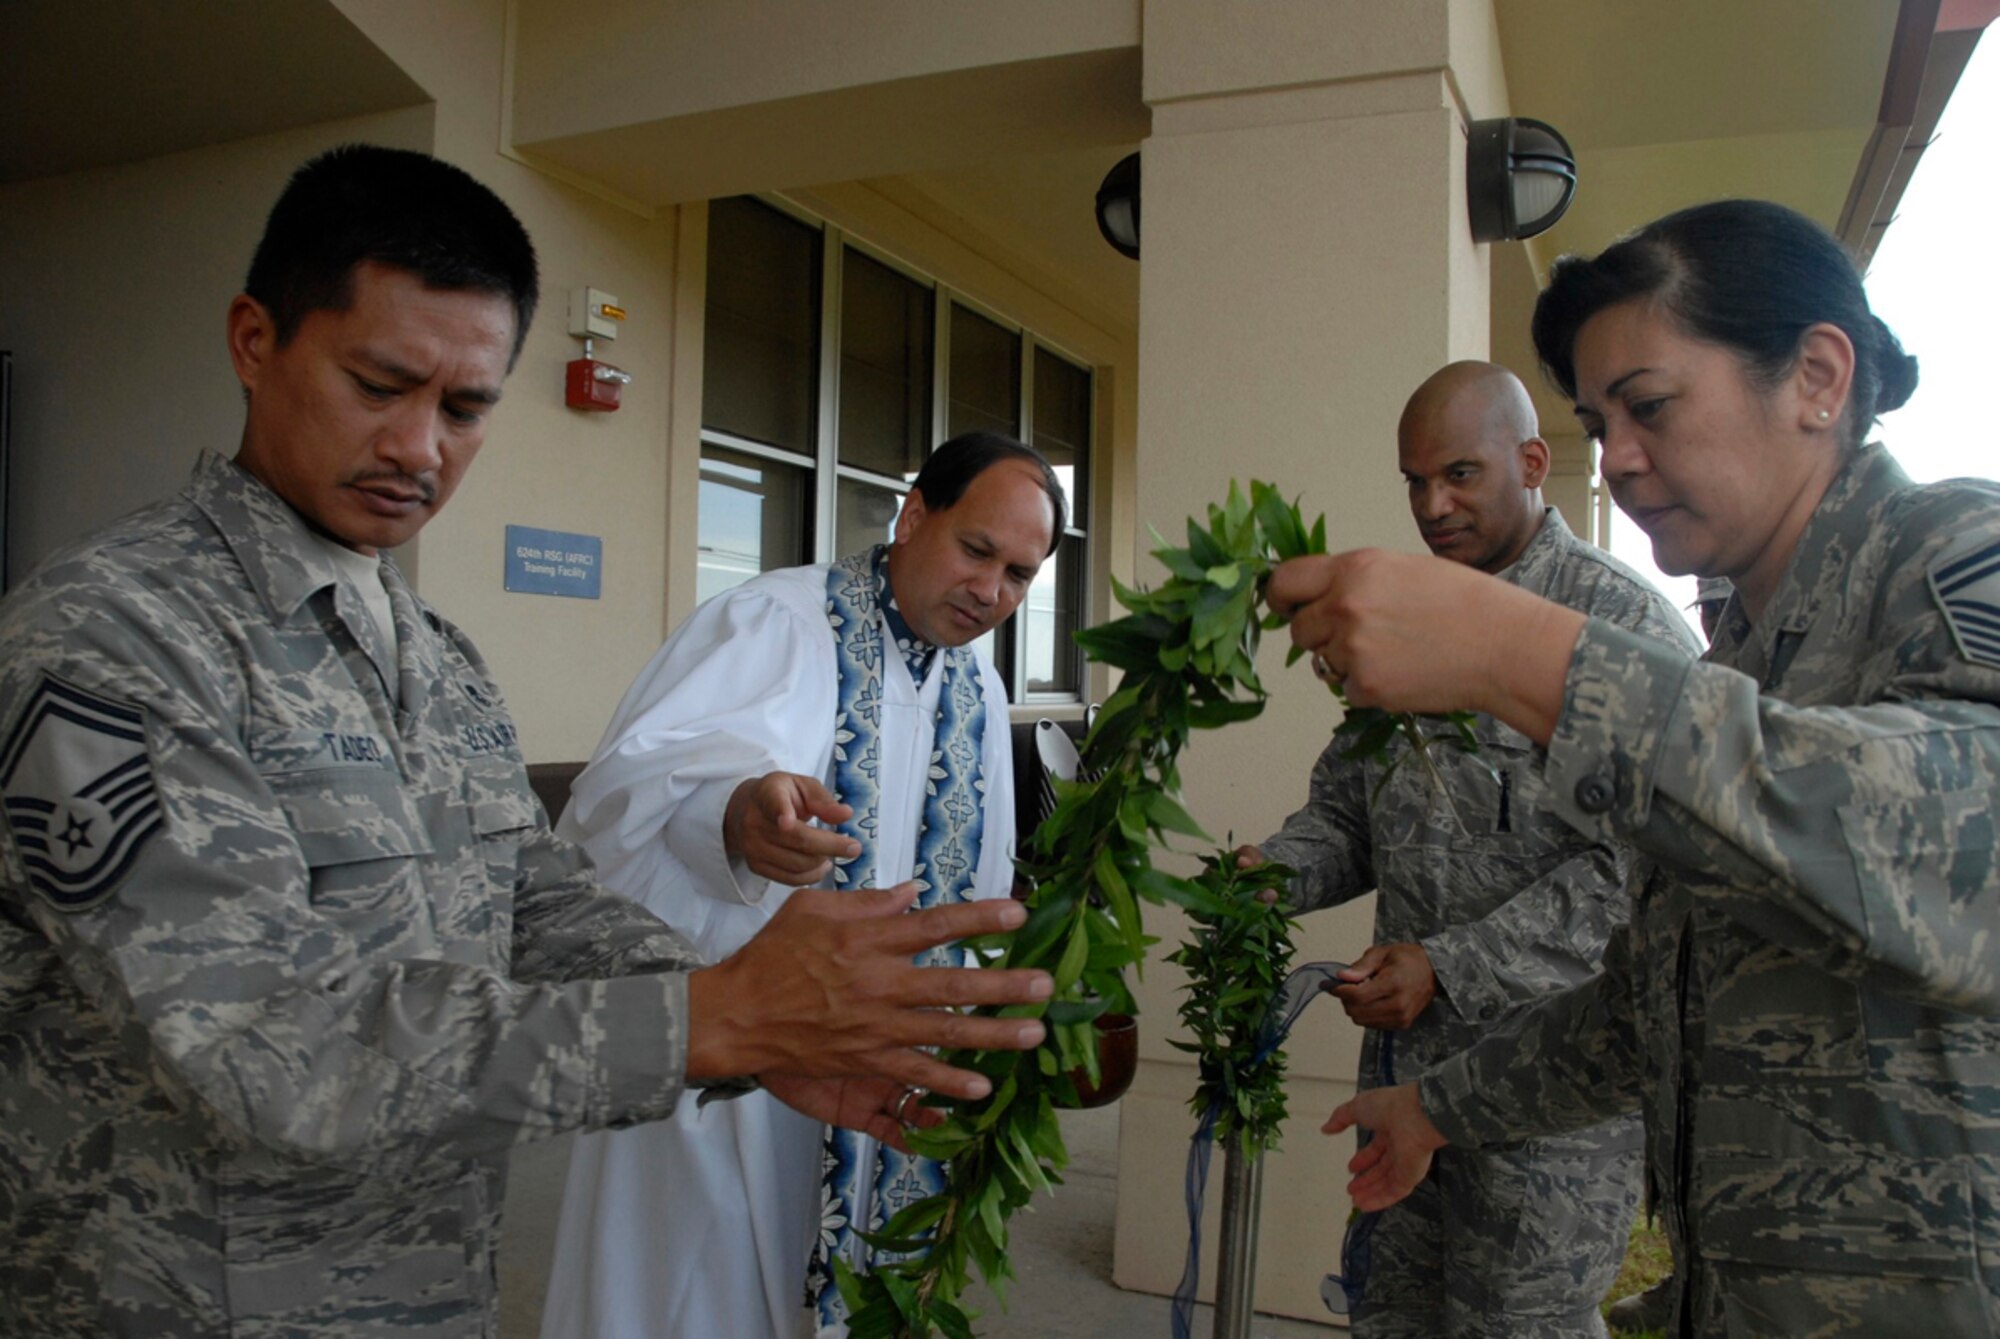 Kahu Kordell Kedoa, a pastor from Kamehameha Schools in Honolulu, directs Senior Master Sgts. Ricarte Tadeo, Corina Seitz and Bob Prather, 624th Regional Support Group, to untie a maile lei as part of a Hawaiian blessing ceremony commemorating the opening of a new building for the 624th Regional Support Group December 7, 2008 at Hickam Air Force Base, Hawaii.  The building represents the first structure build specifically for the 624th RSG on the base.  (U.S. Air Force photo by Staff Sgt. Jennie Chamberlin

